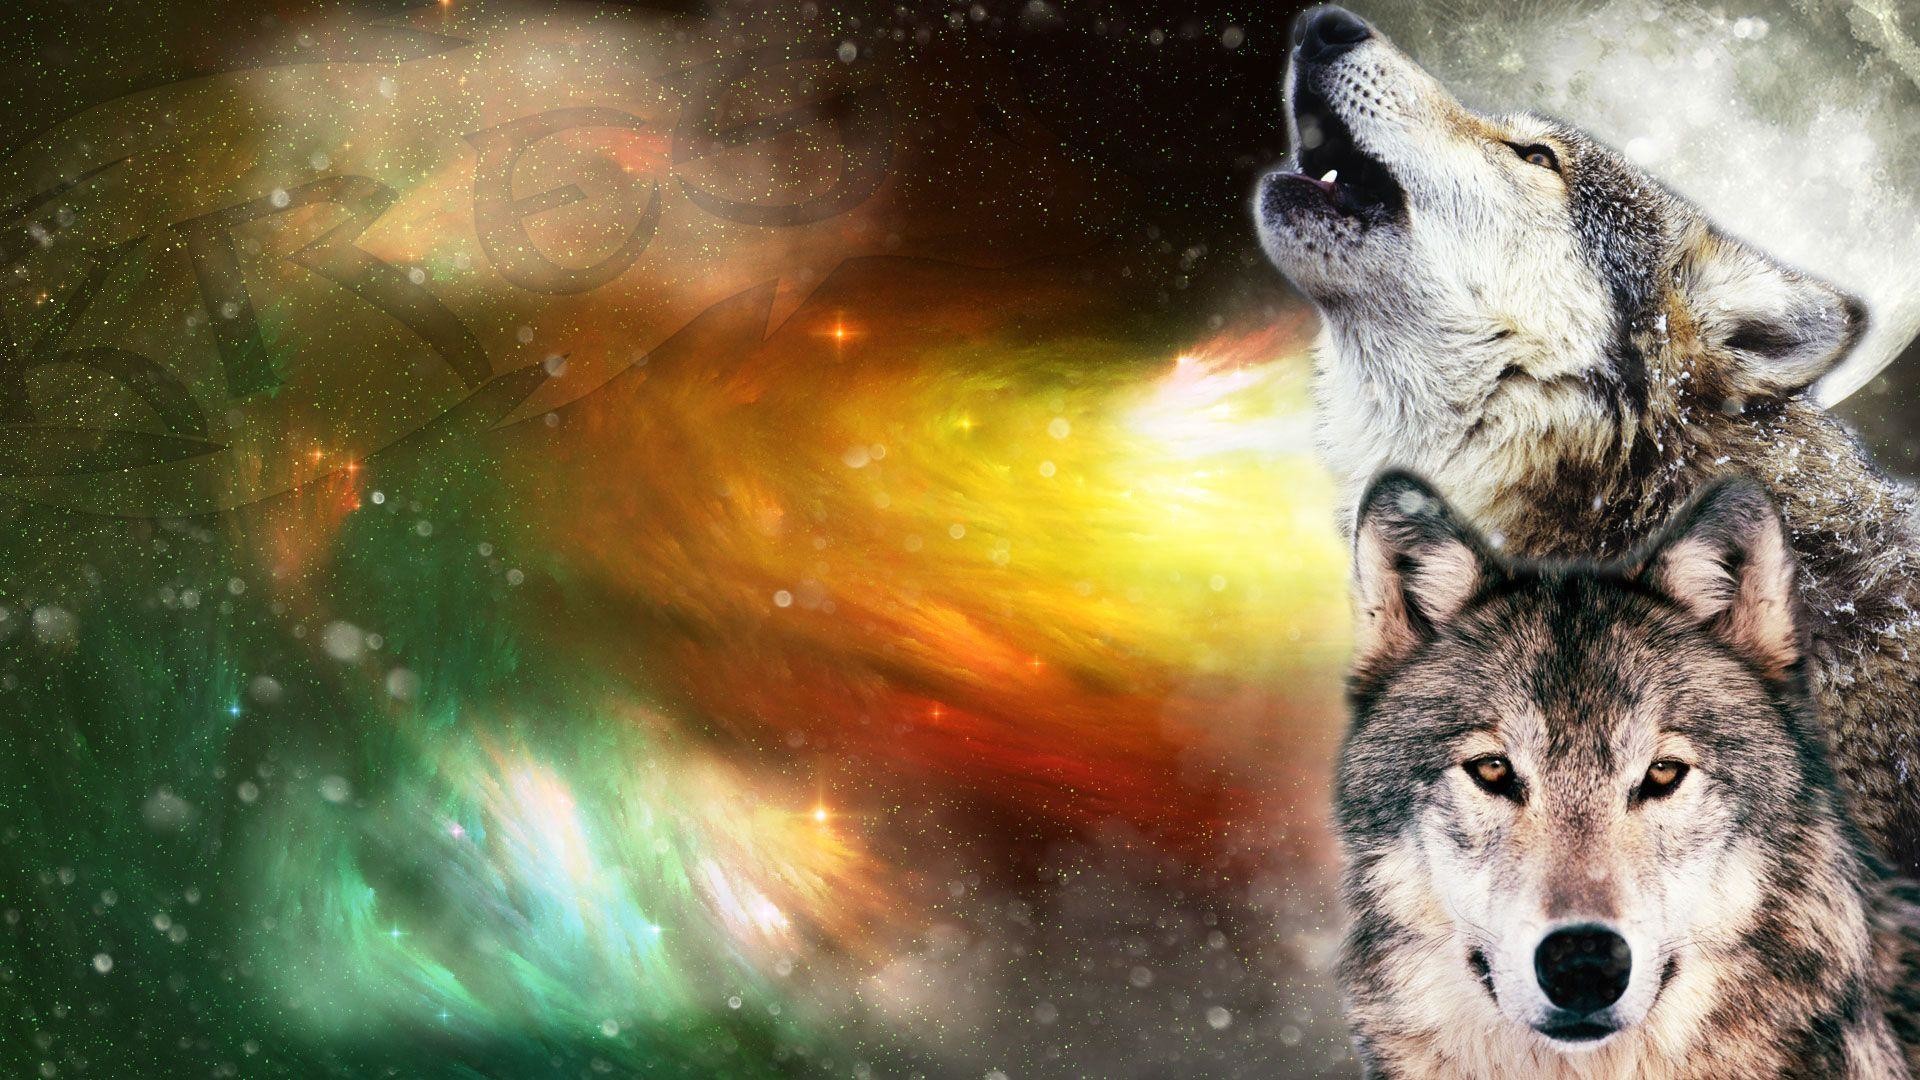 Wolf Howling At The Moon Wallpaper.